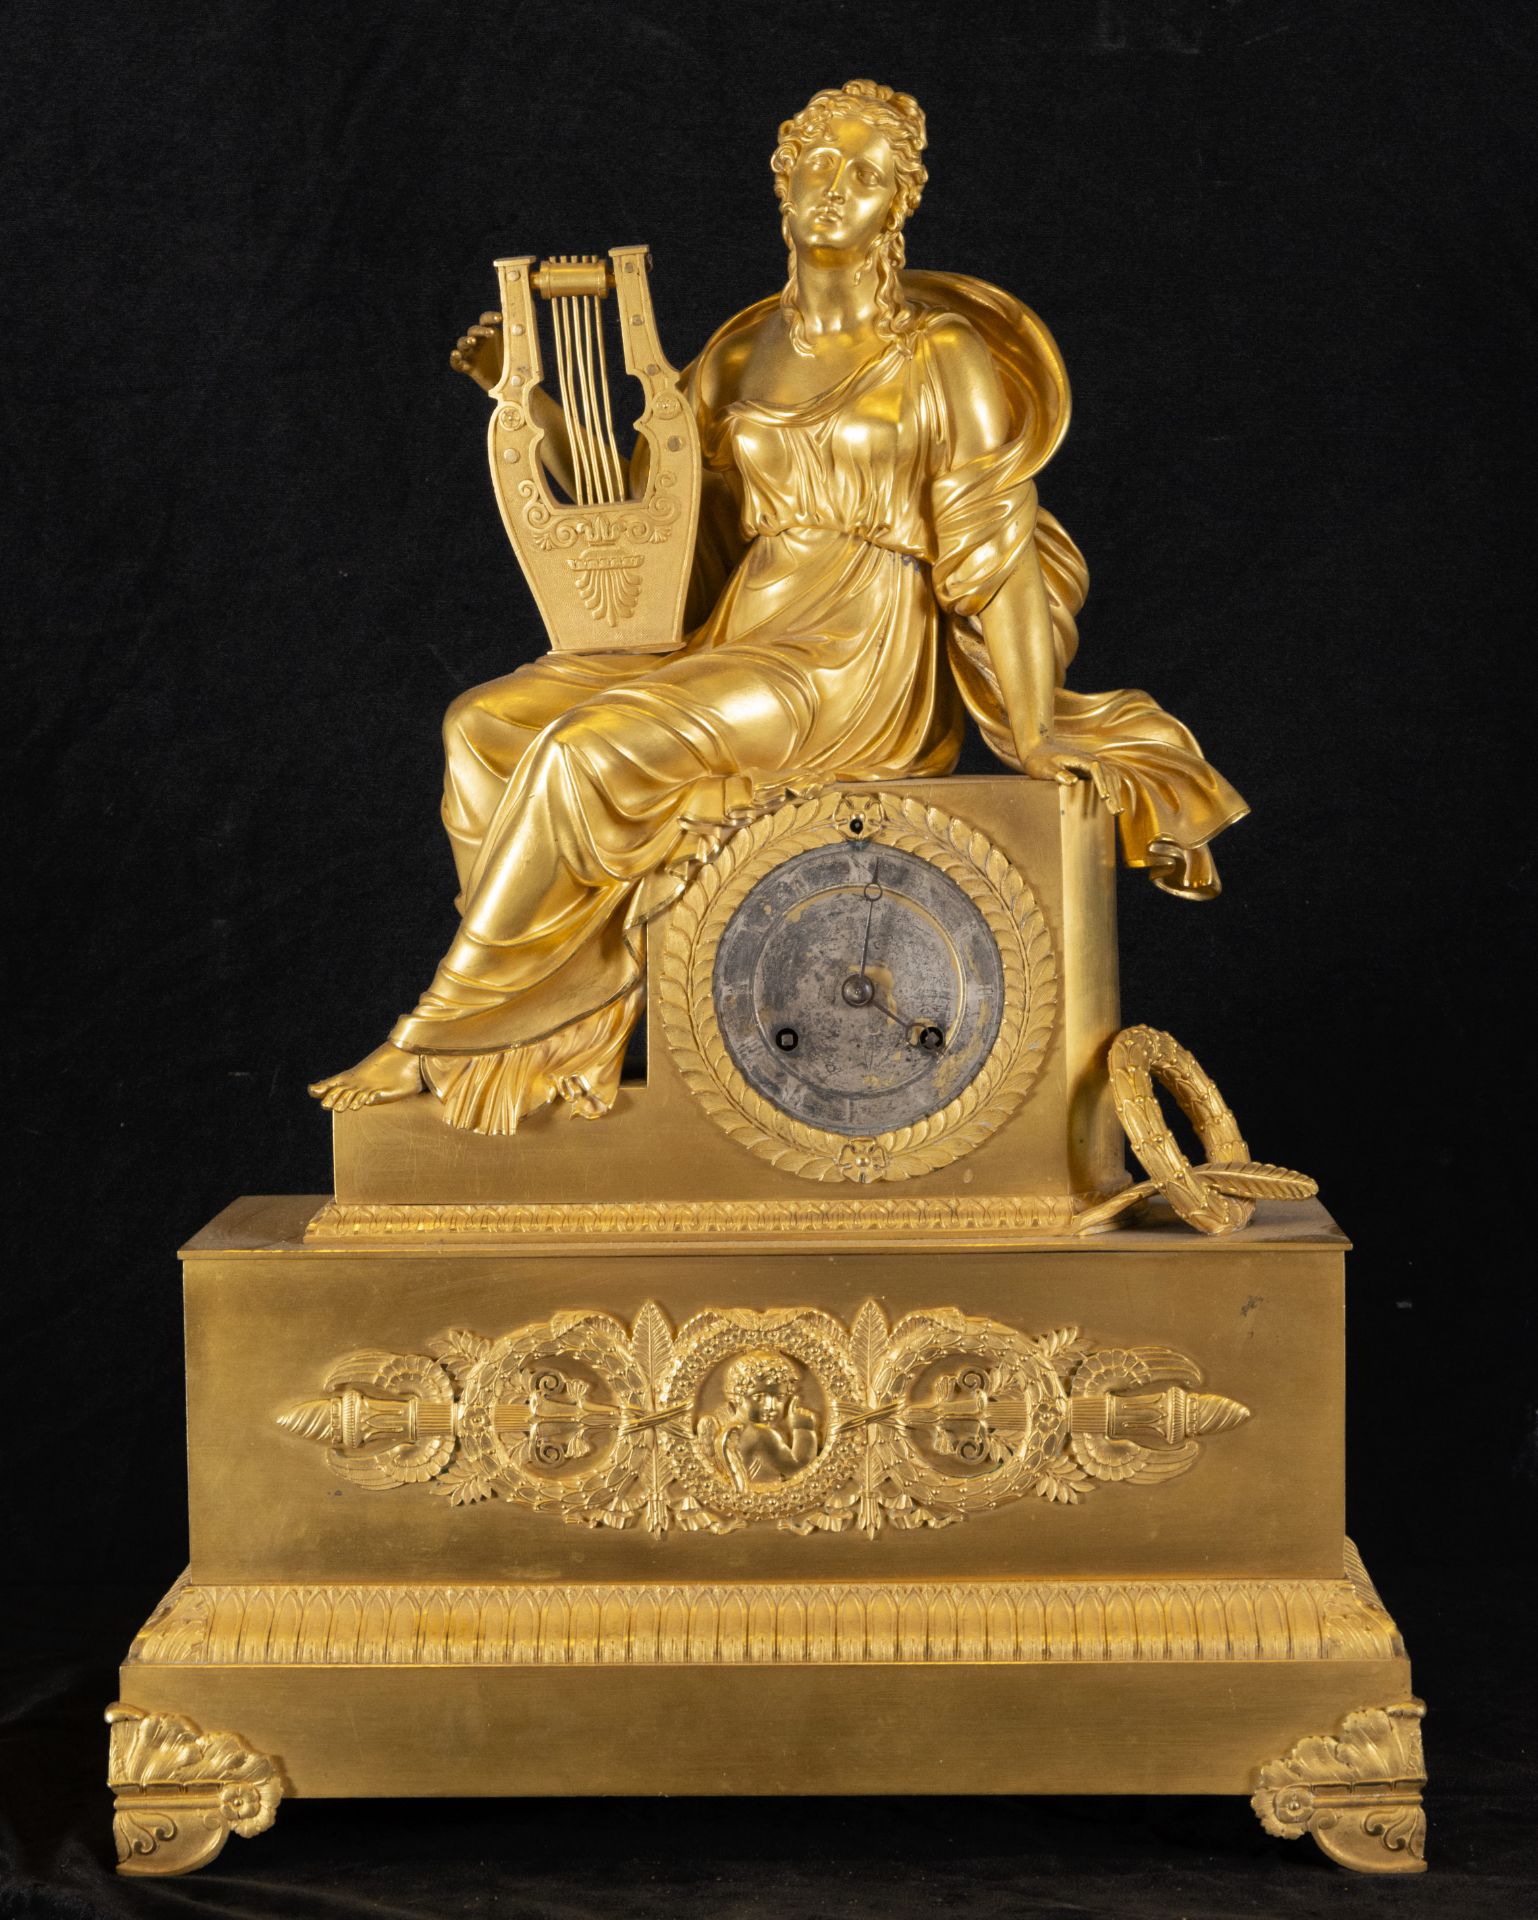 Important French Empire period table clock, early 19th century, in mercury gilt bronze